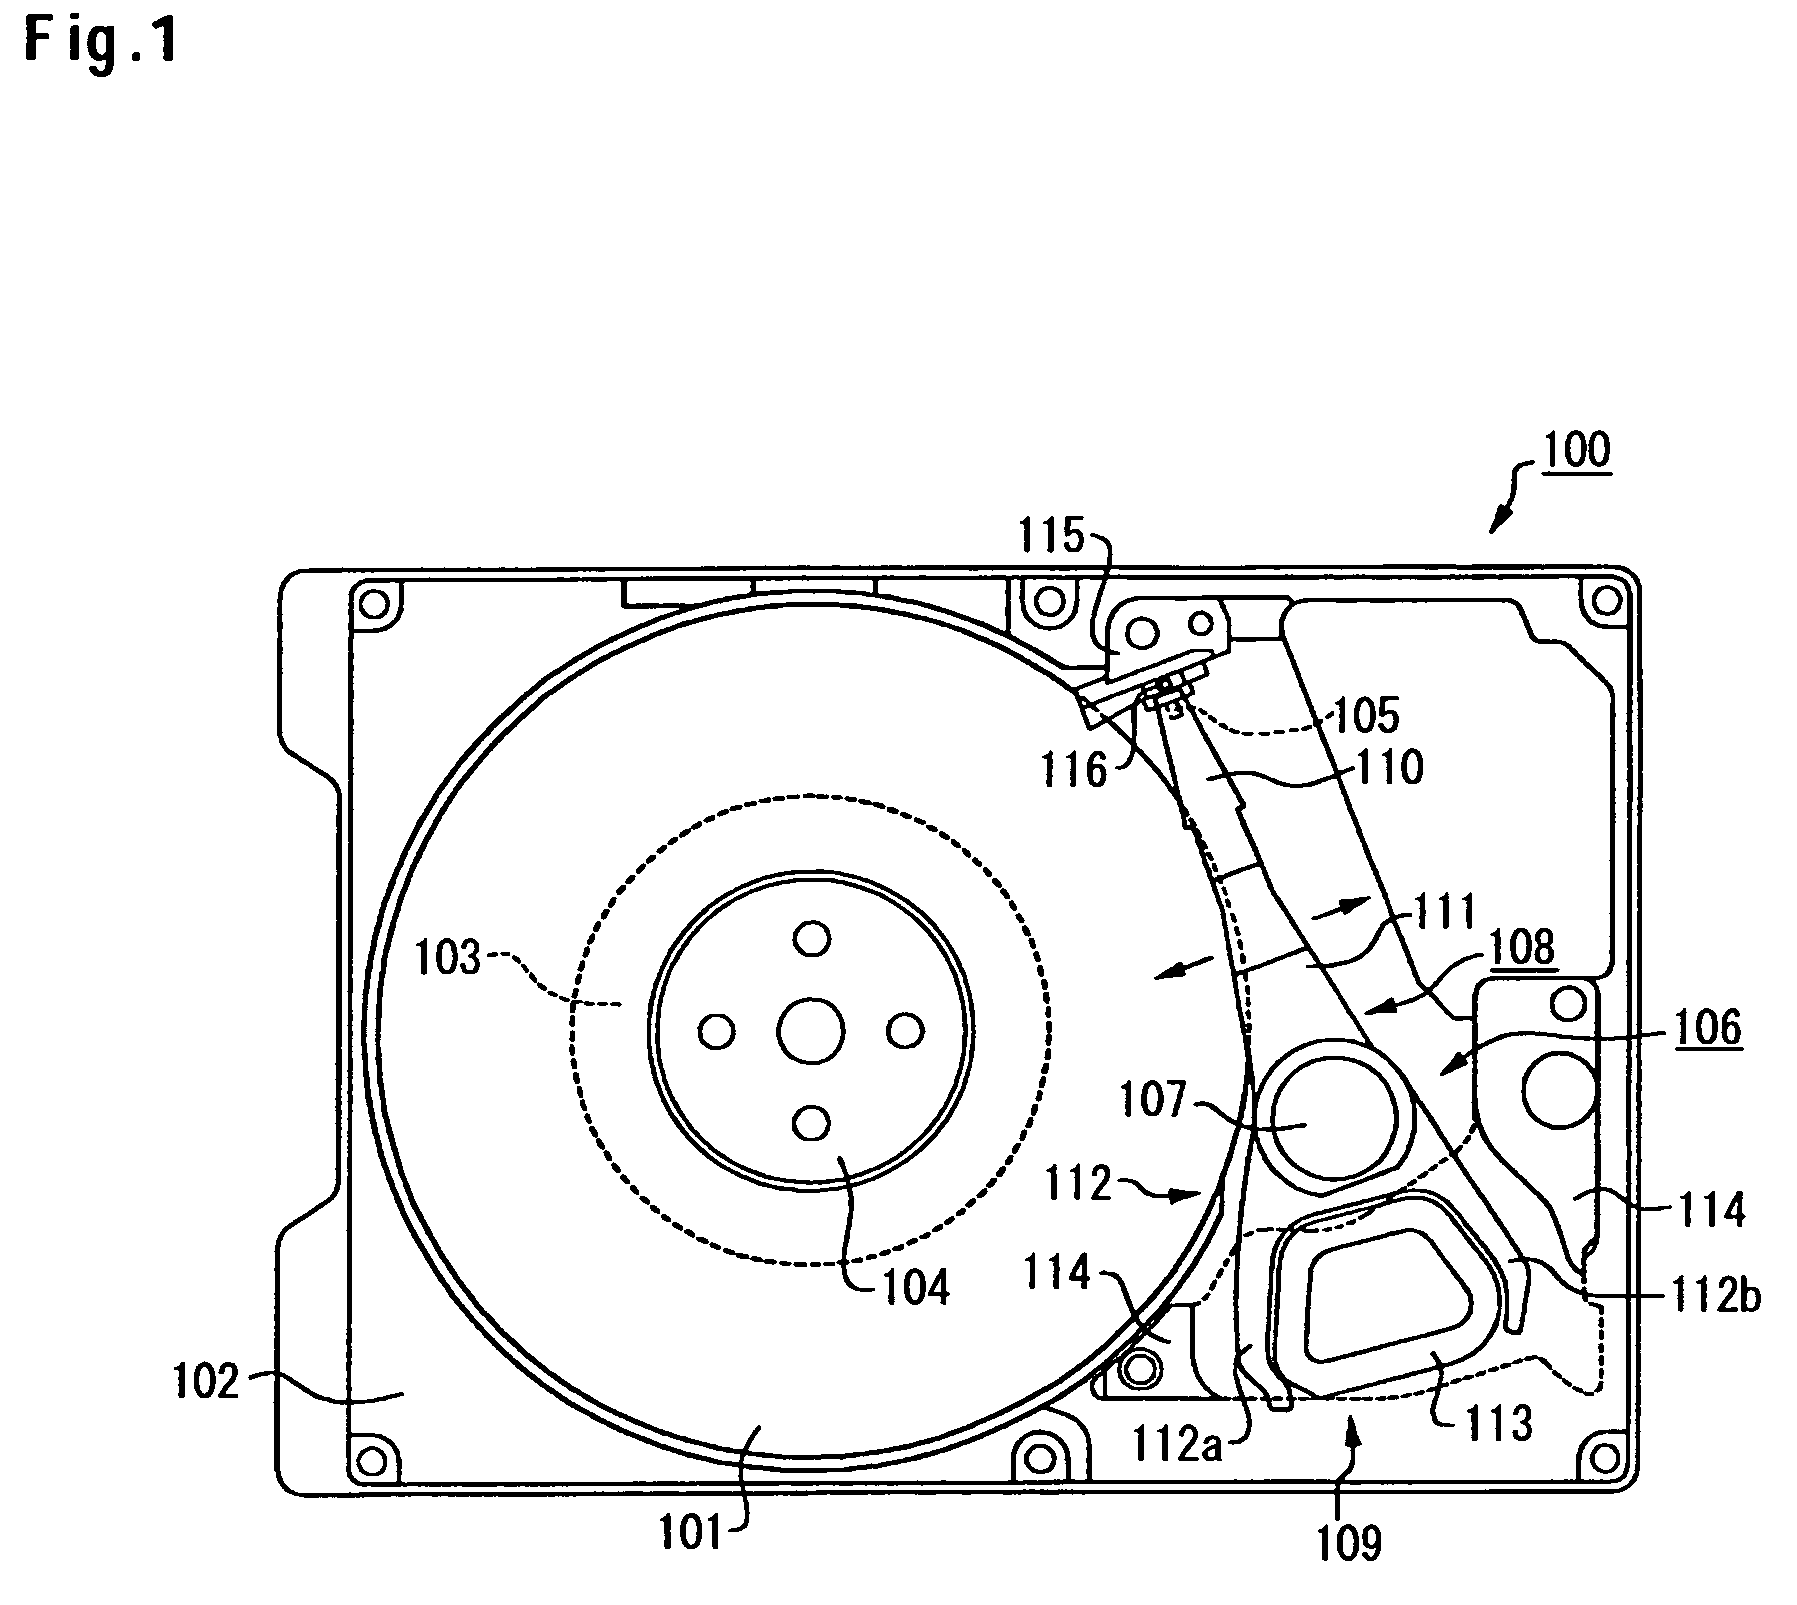 Suspension and limiter mechanism for a data storage device